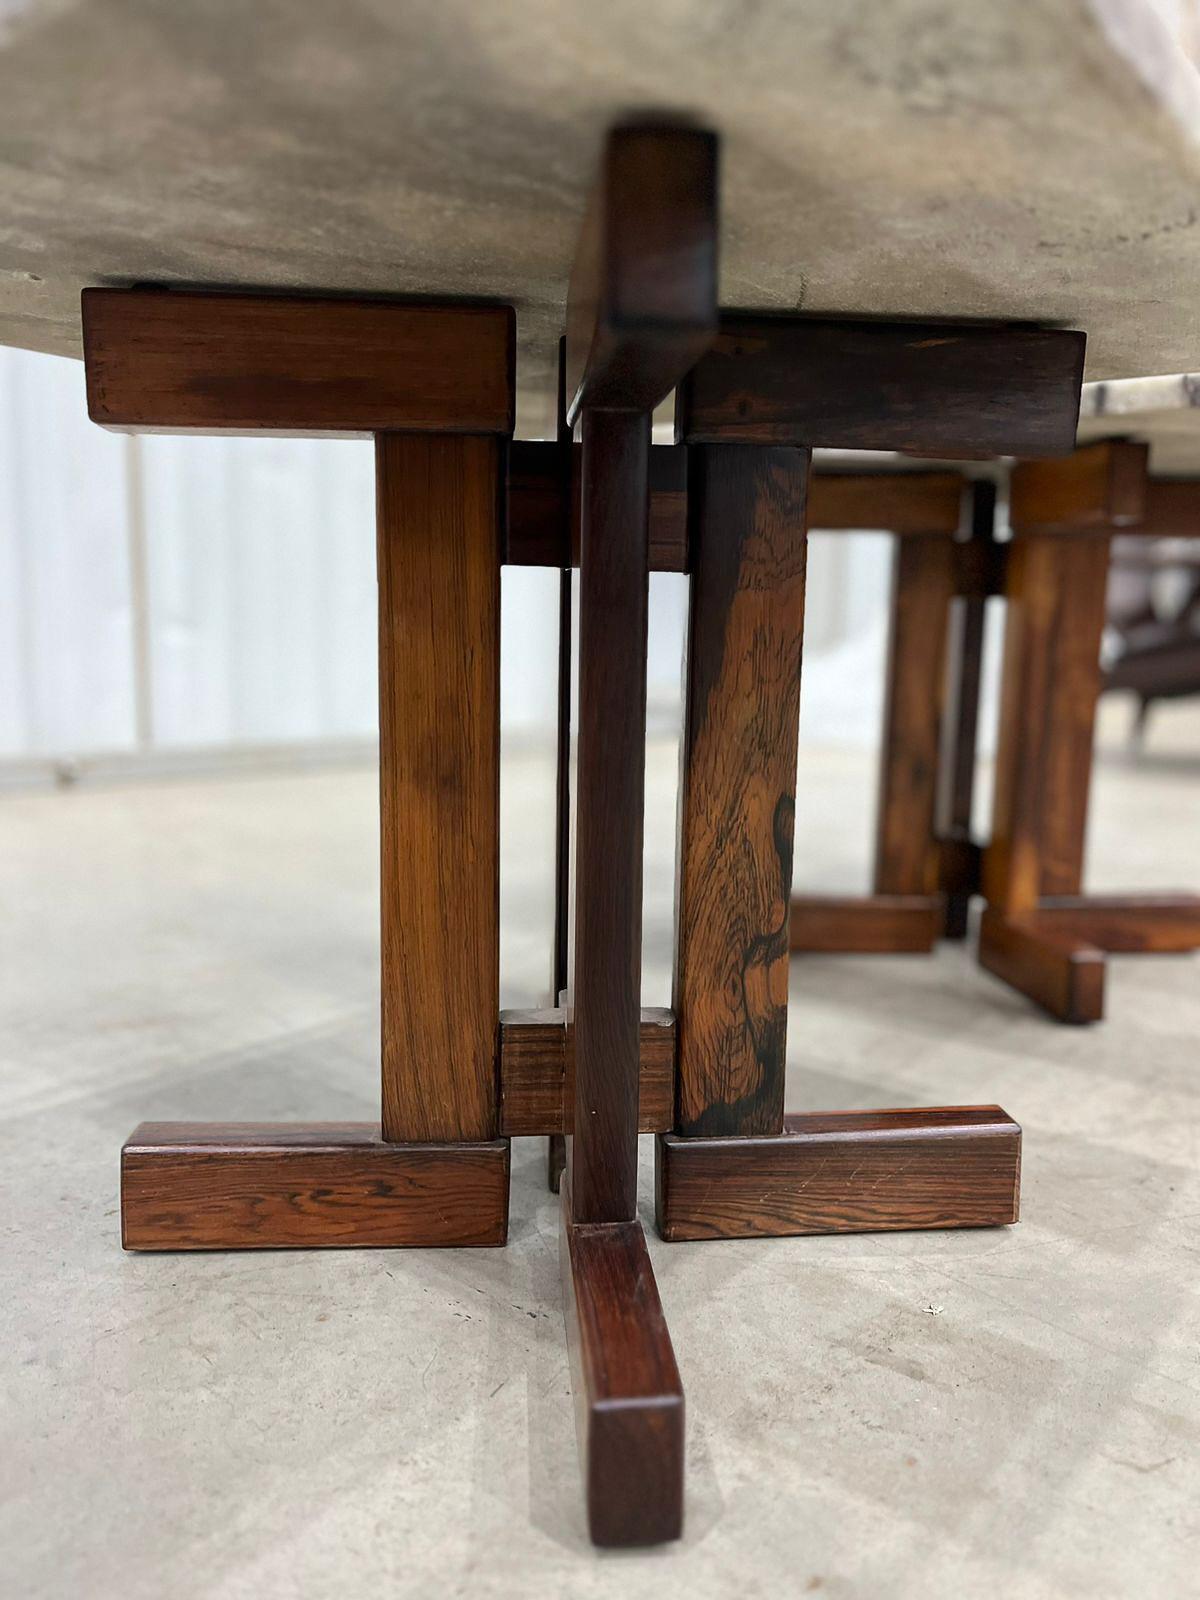 Brazilian Modern Pair of Side Tables in Rosewood and Granite by Celina, c. 1960 For Sale 6